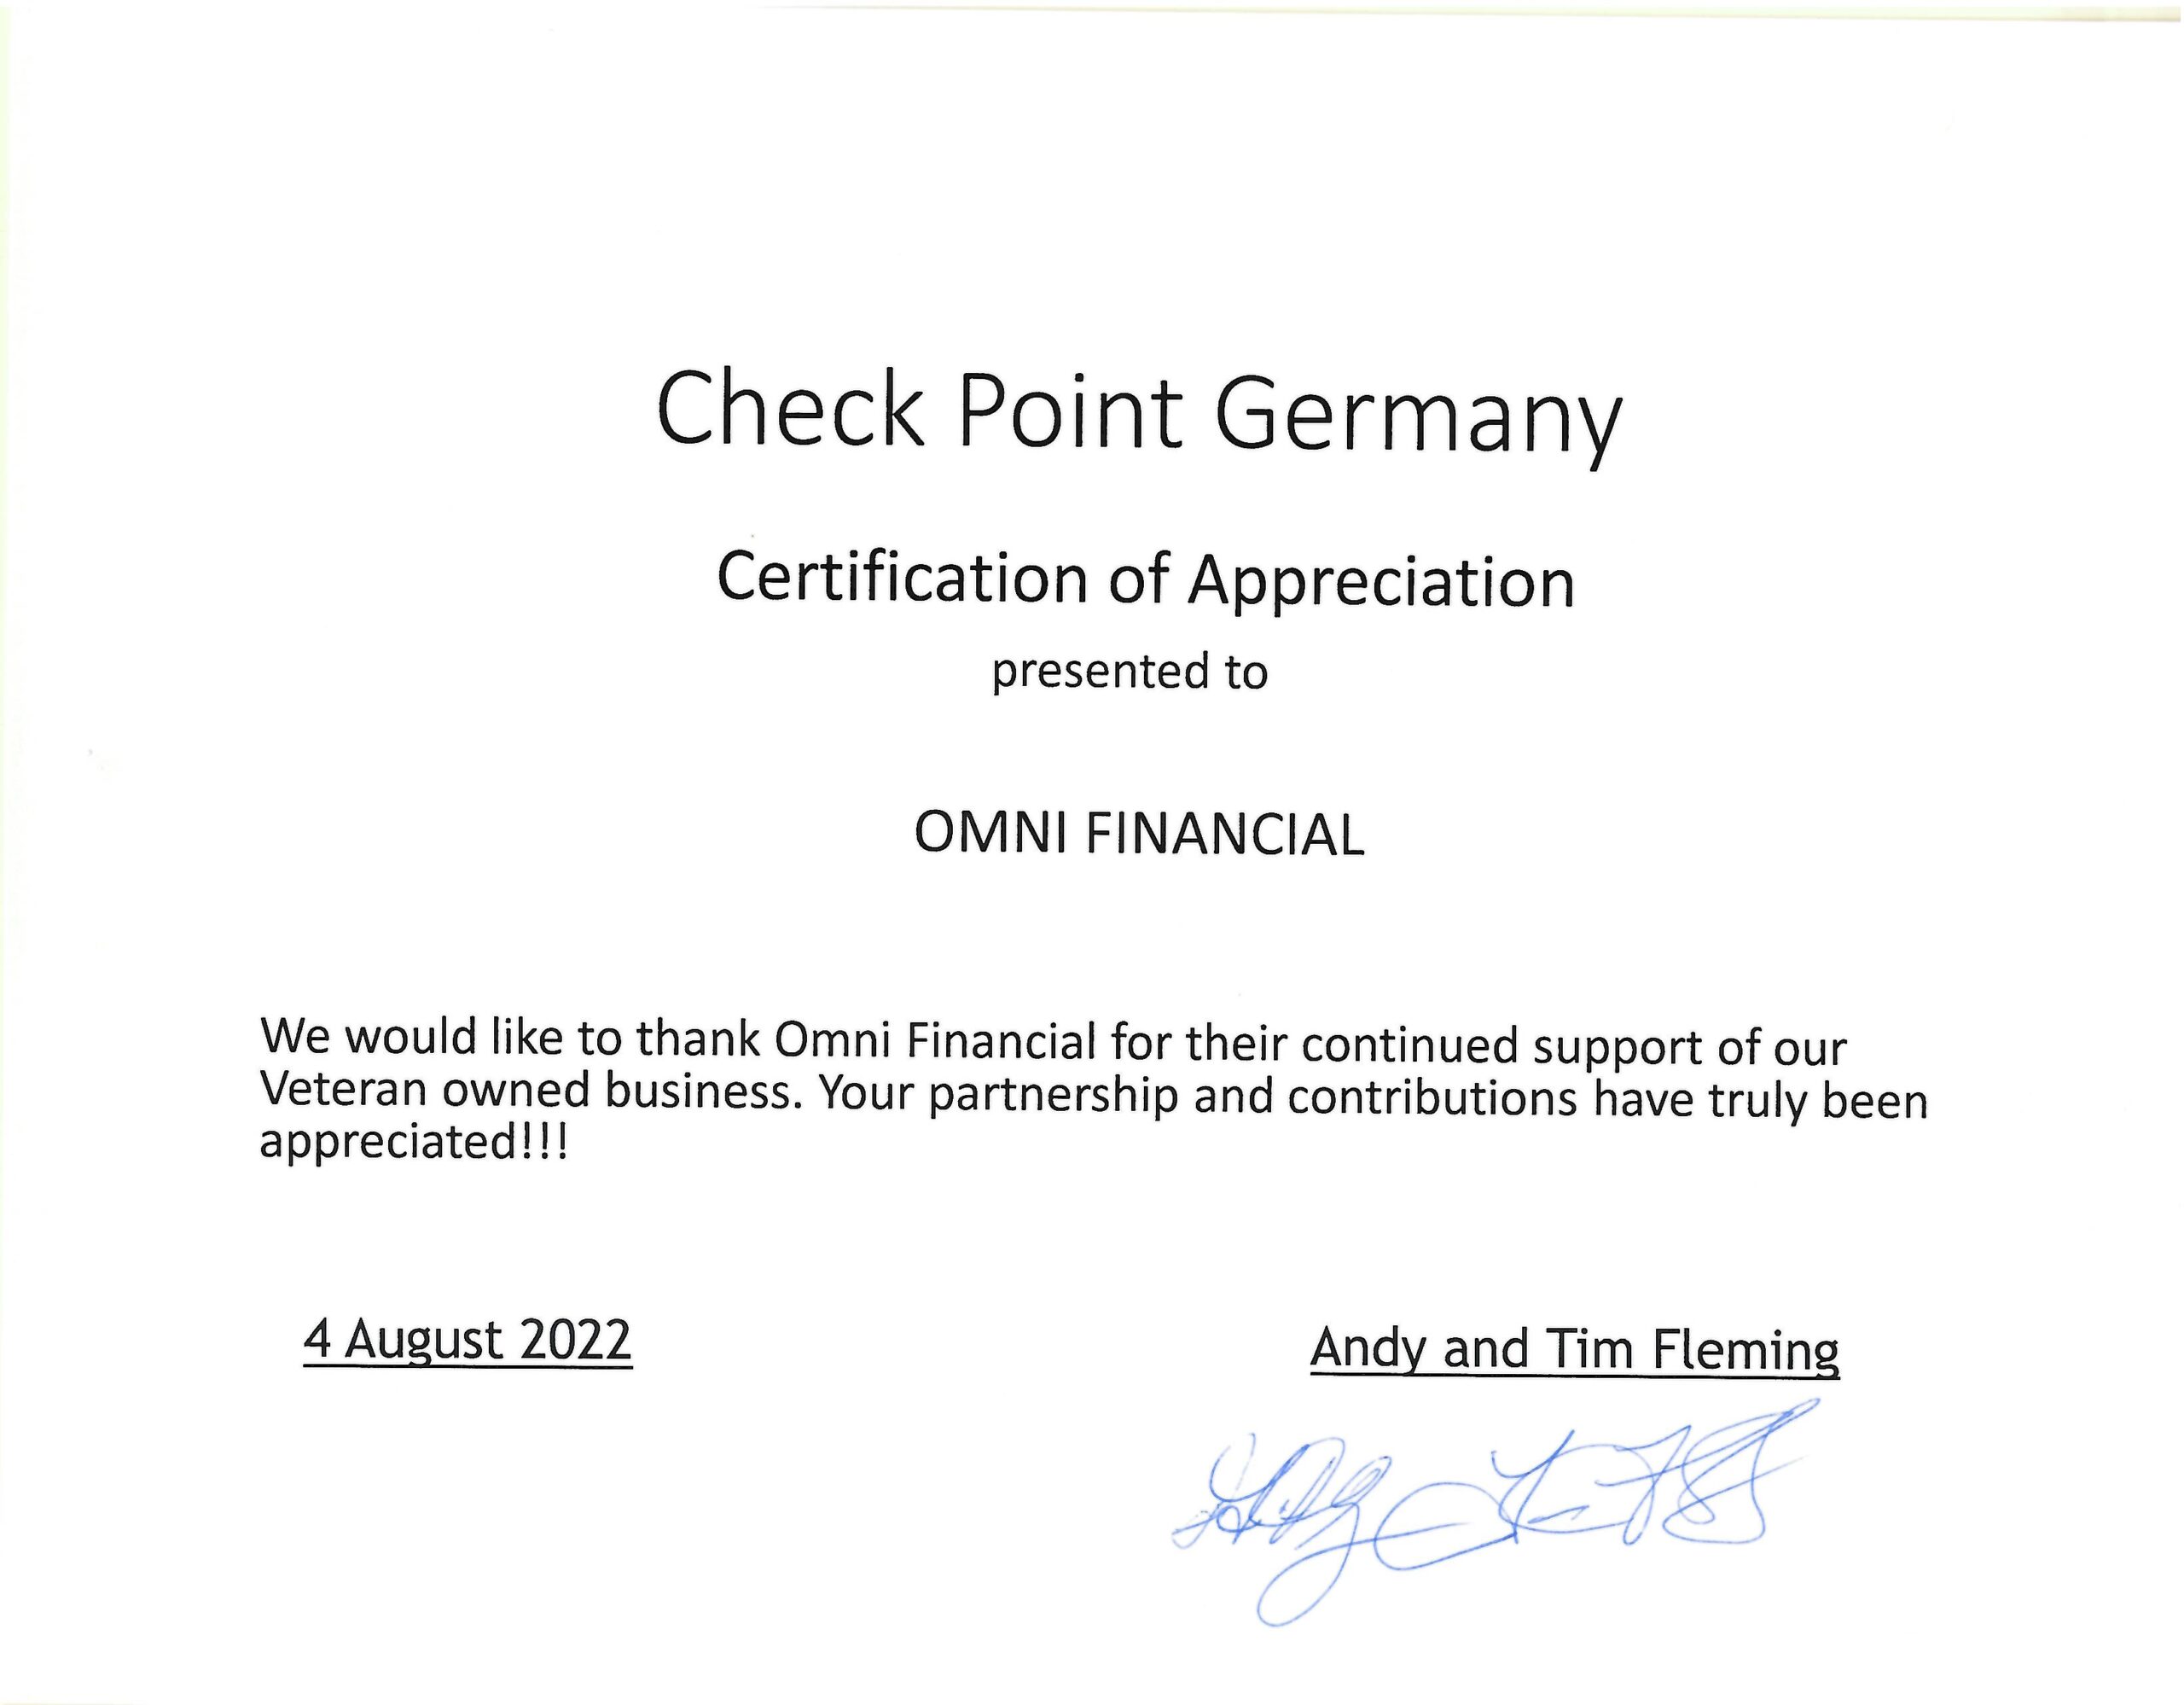 Check Point Germany Certificate of Appreciation